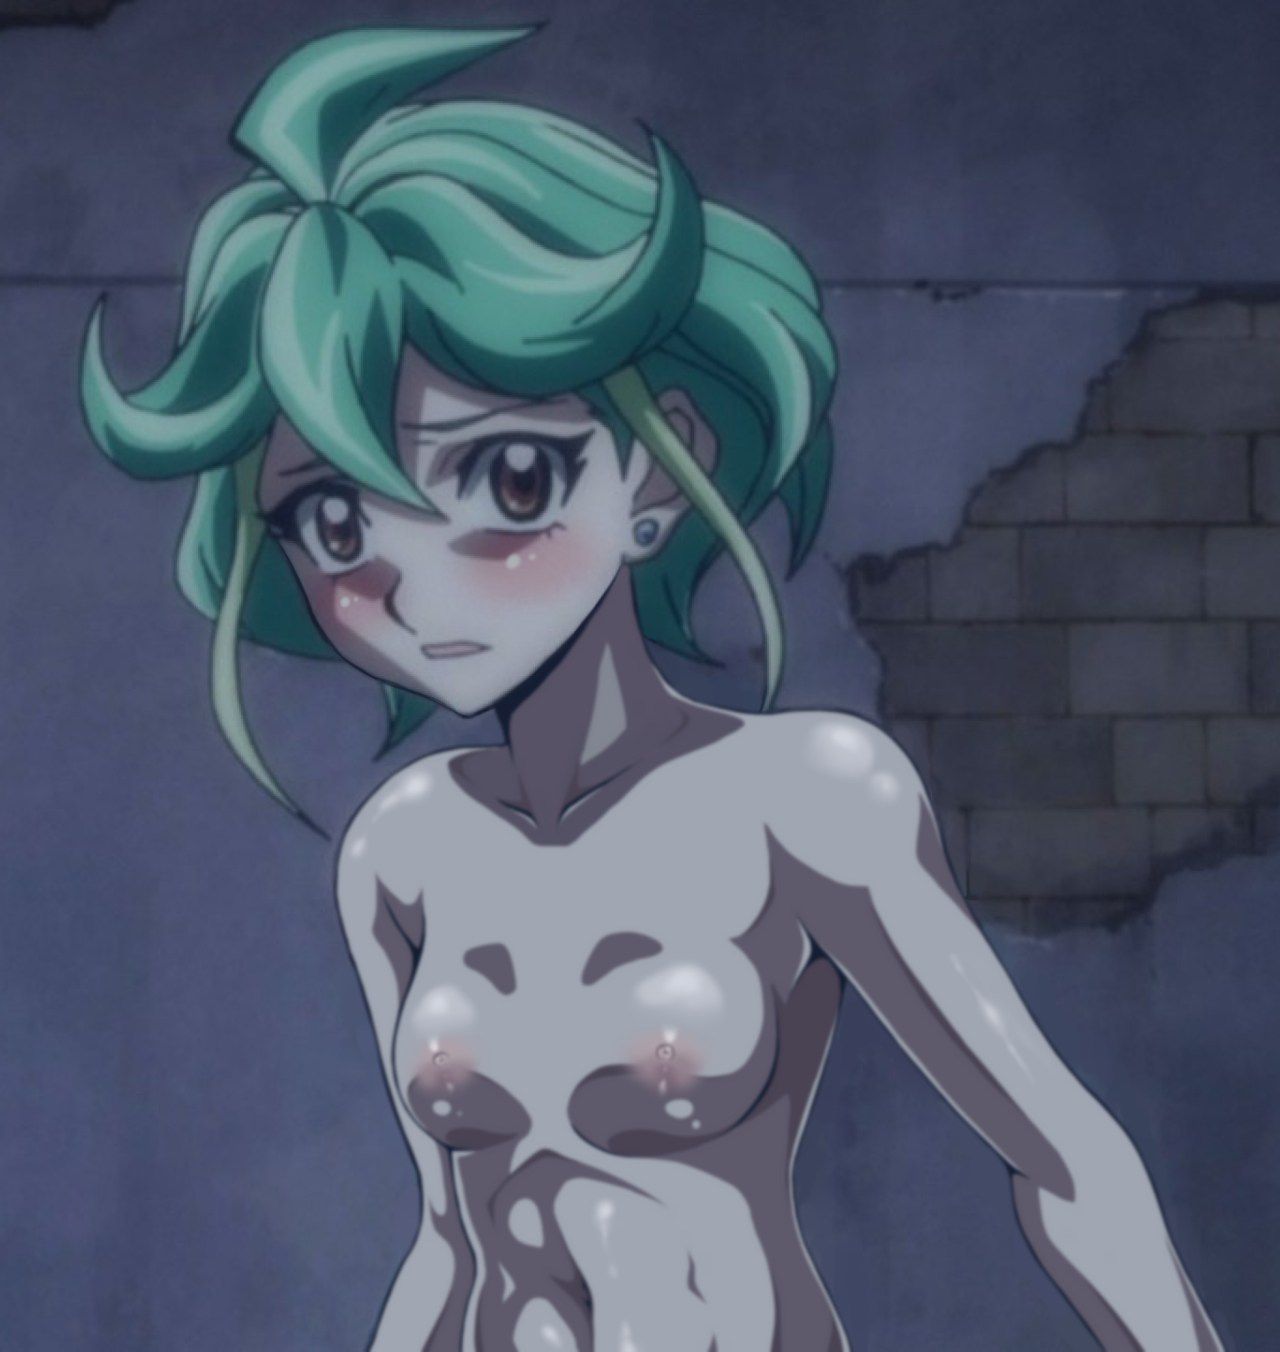 [Yu-Gi-oh] stripping of the heroine such as Black magician Girl Photoshop part2 25